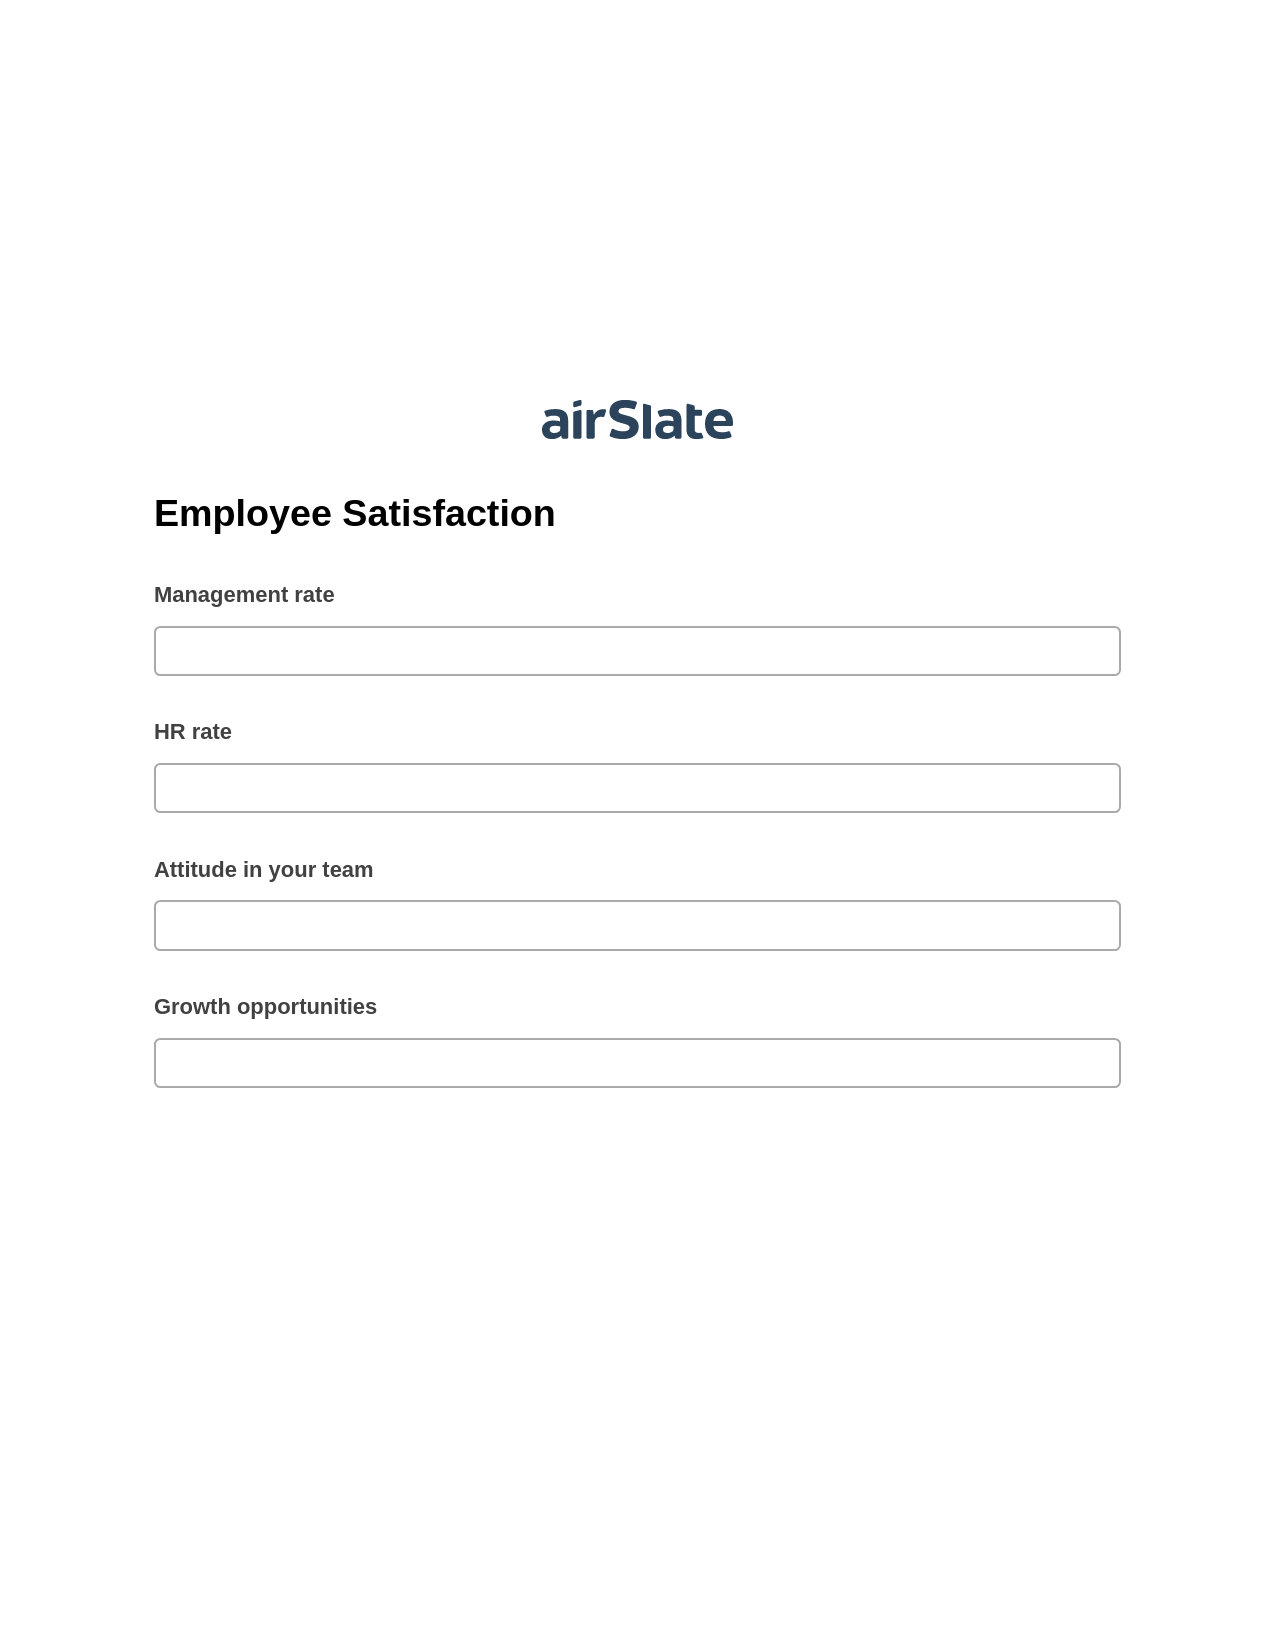 Employee Satisfaction Pre-fill from Salesforce Record Bot, Remove Tags From Slate Bot, Export to Excel 365 Bot